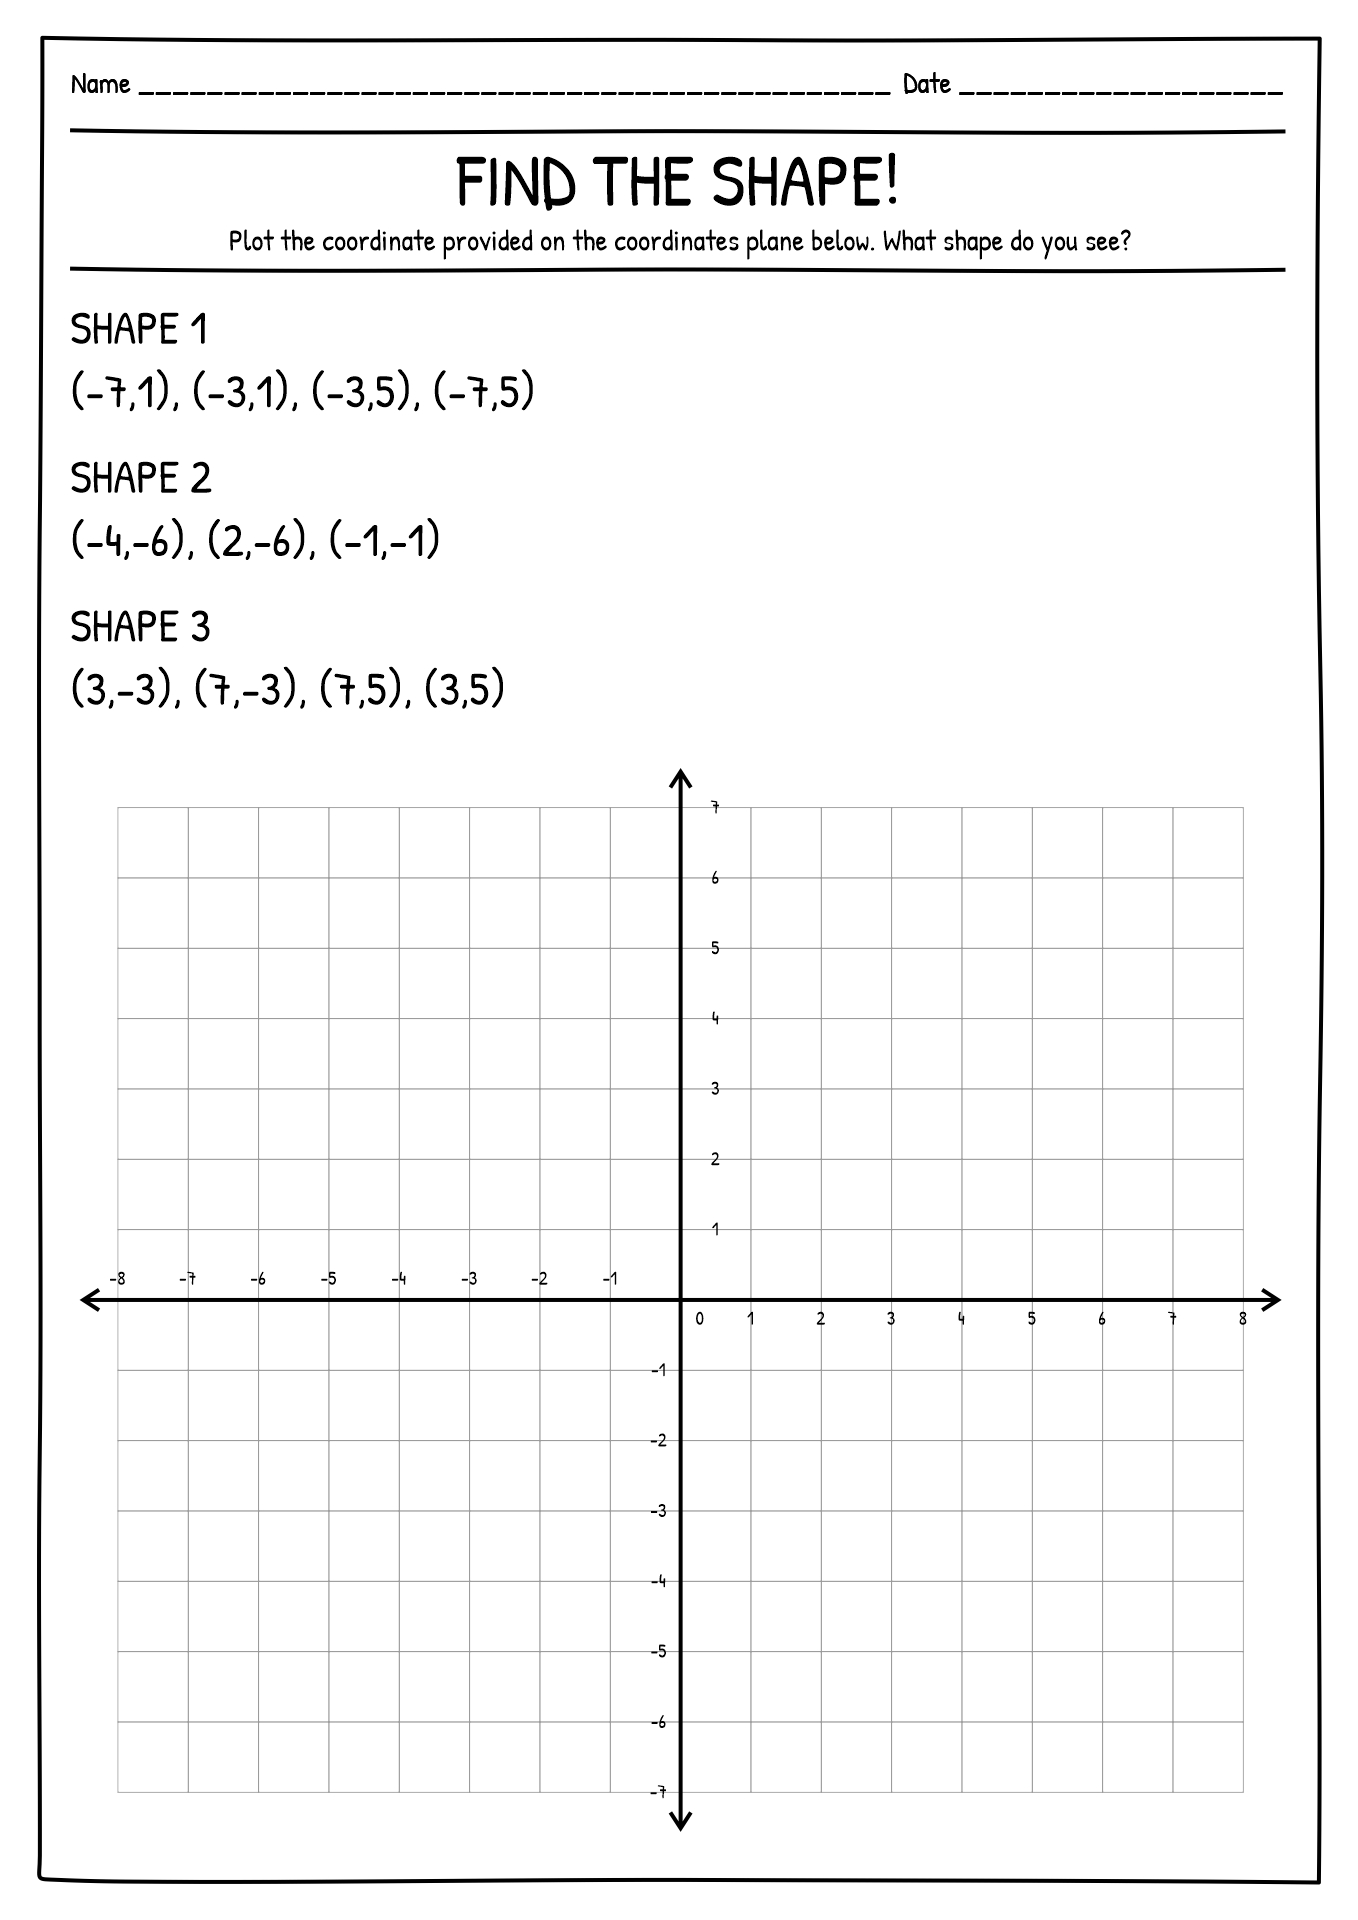 10 Best Images of Coordinate Plane Connect Dots Worksheets - Coordinate